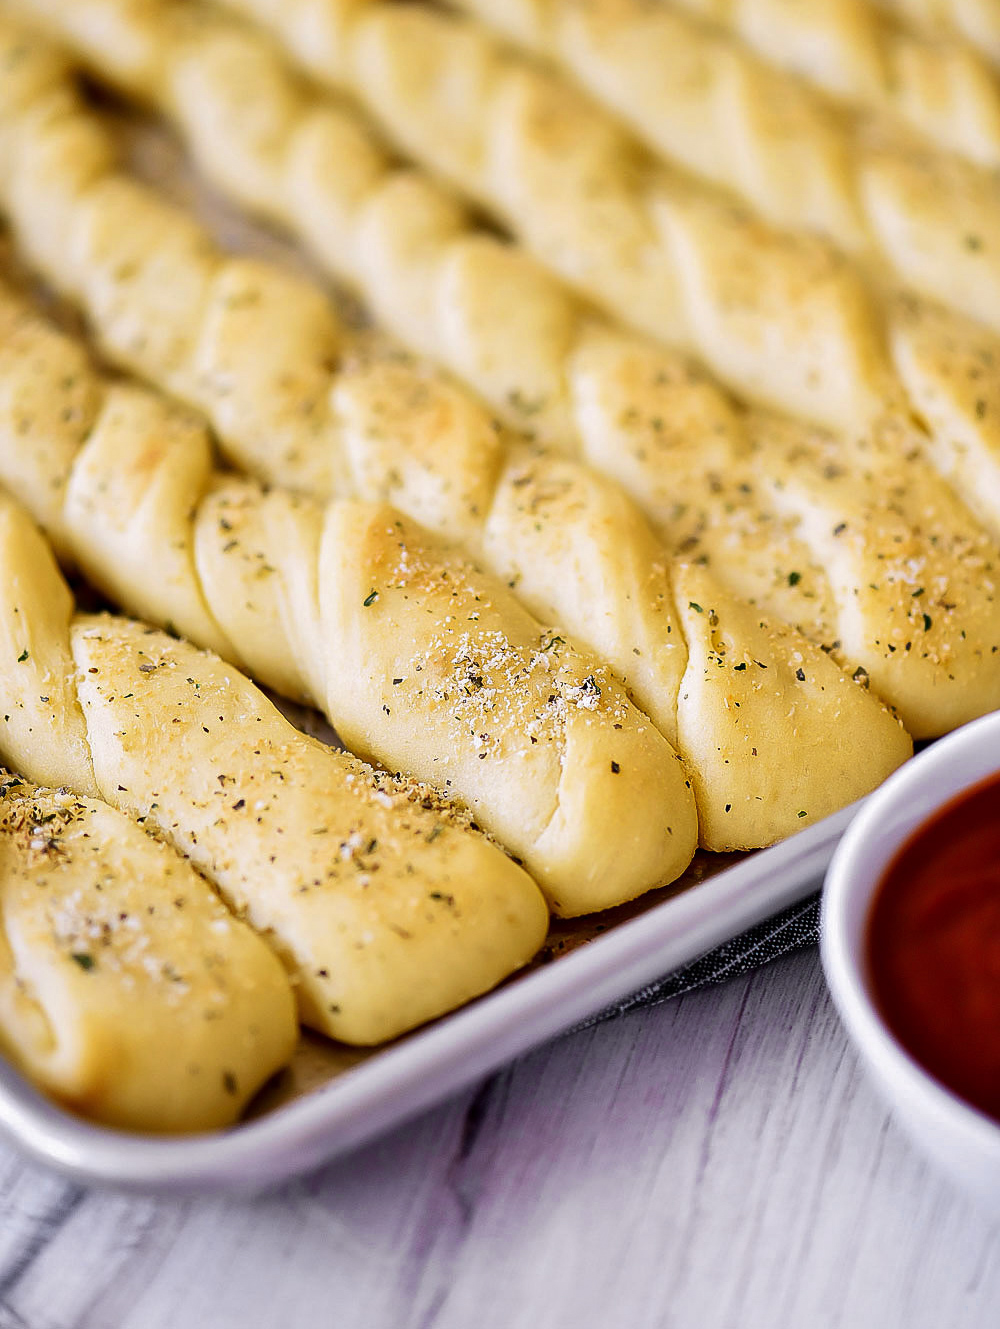 A color photo of bread sticks lined up on a baking sheet.